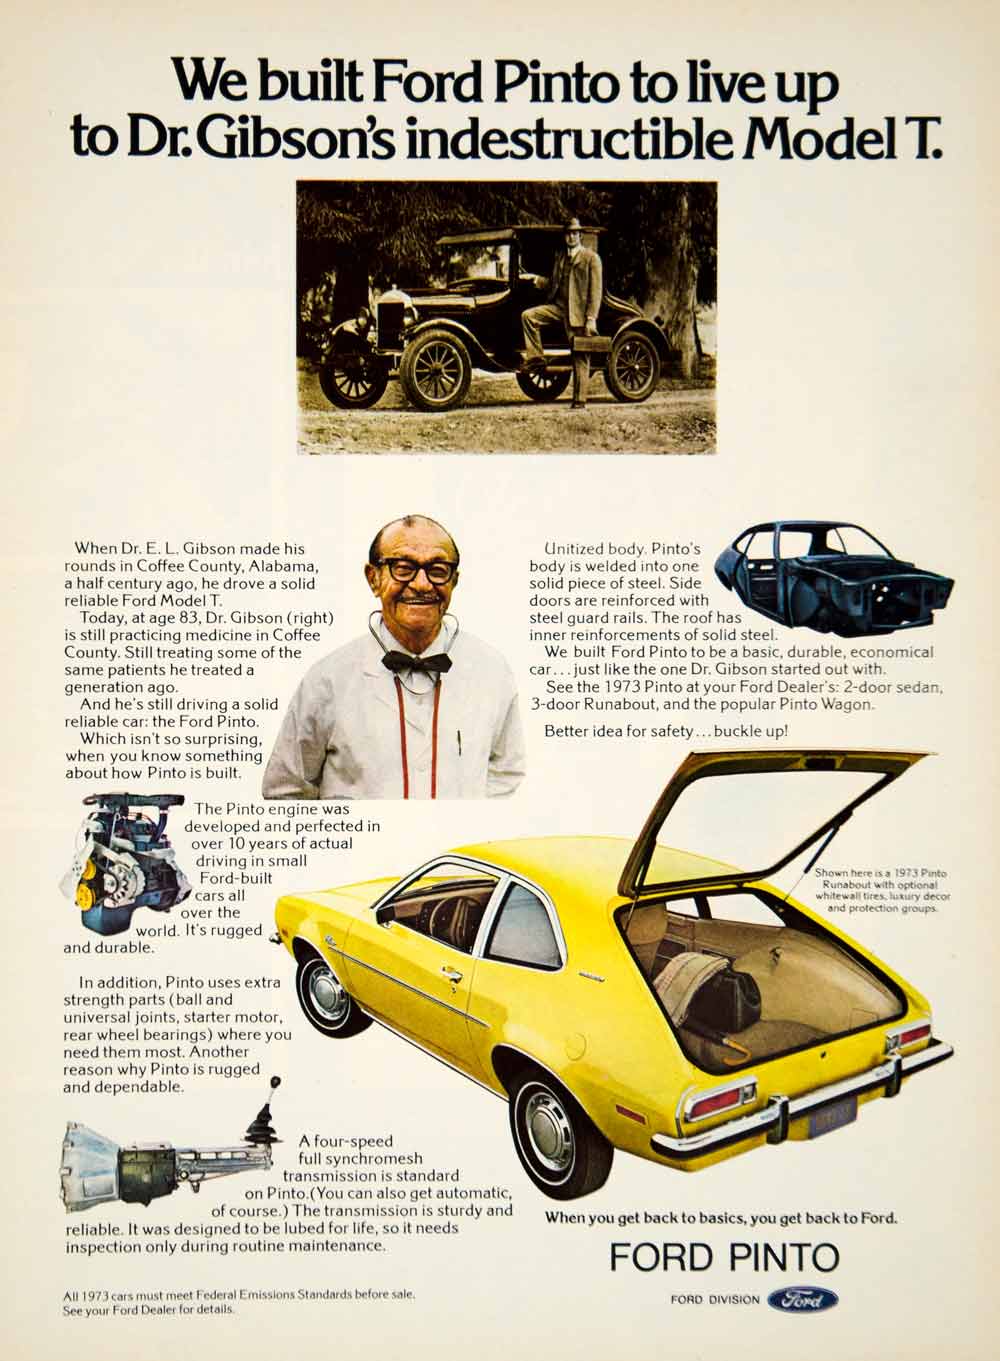 1972 Ad 1973 Ford Pinto 3 Door Hatchback Runabout Model T EL Gibson YCD8